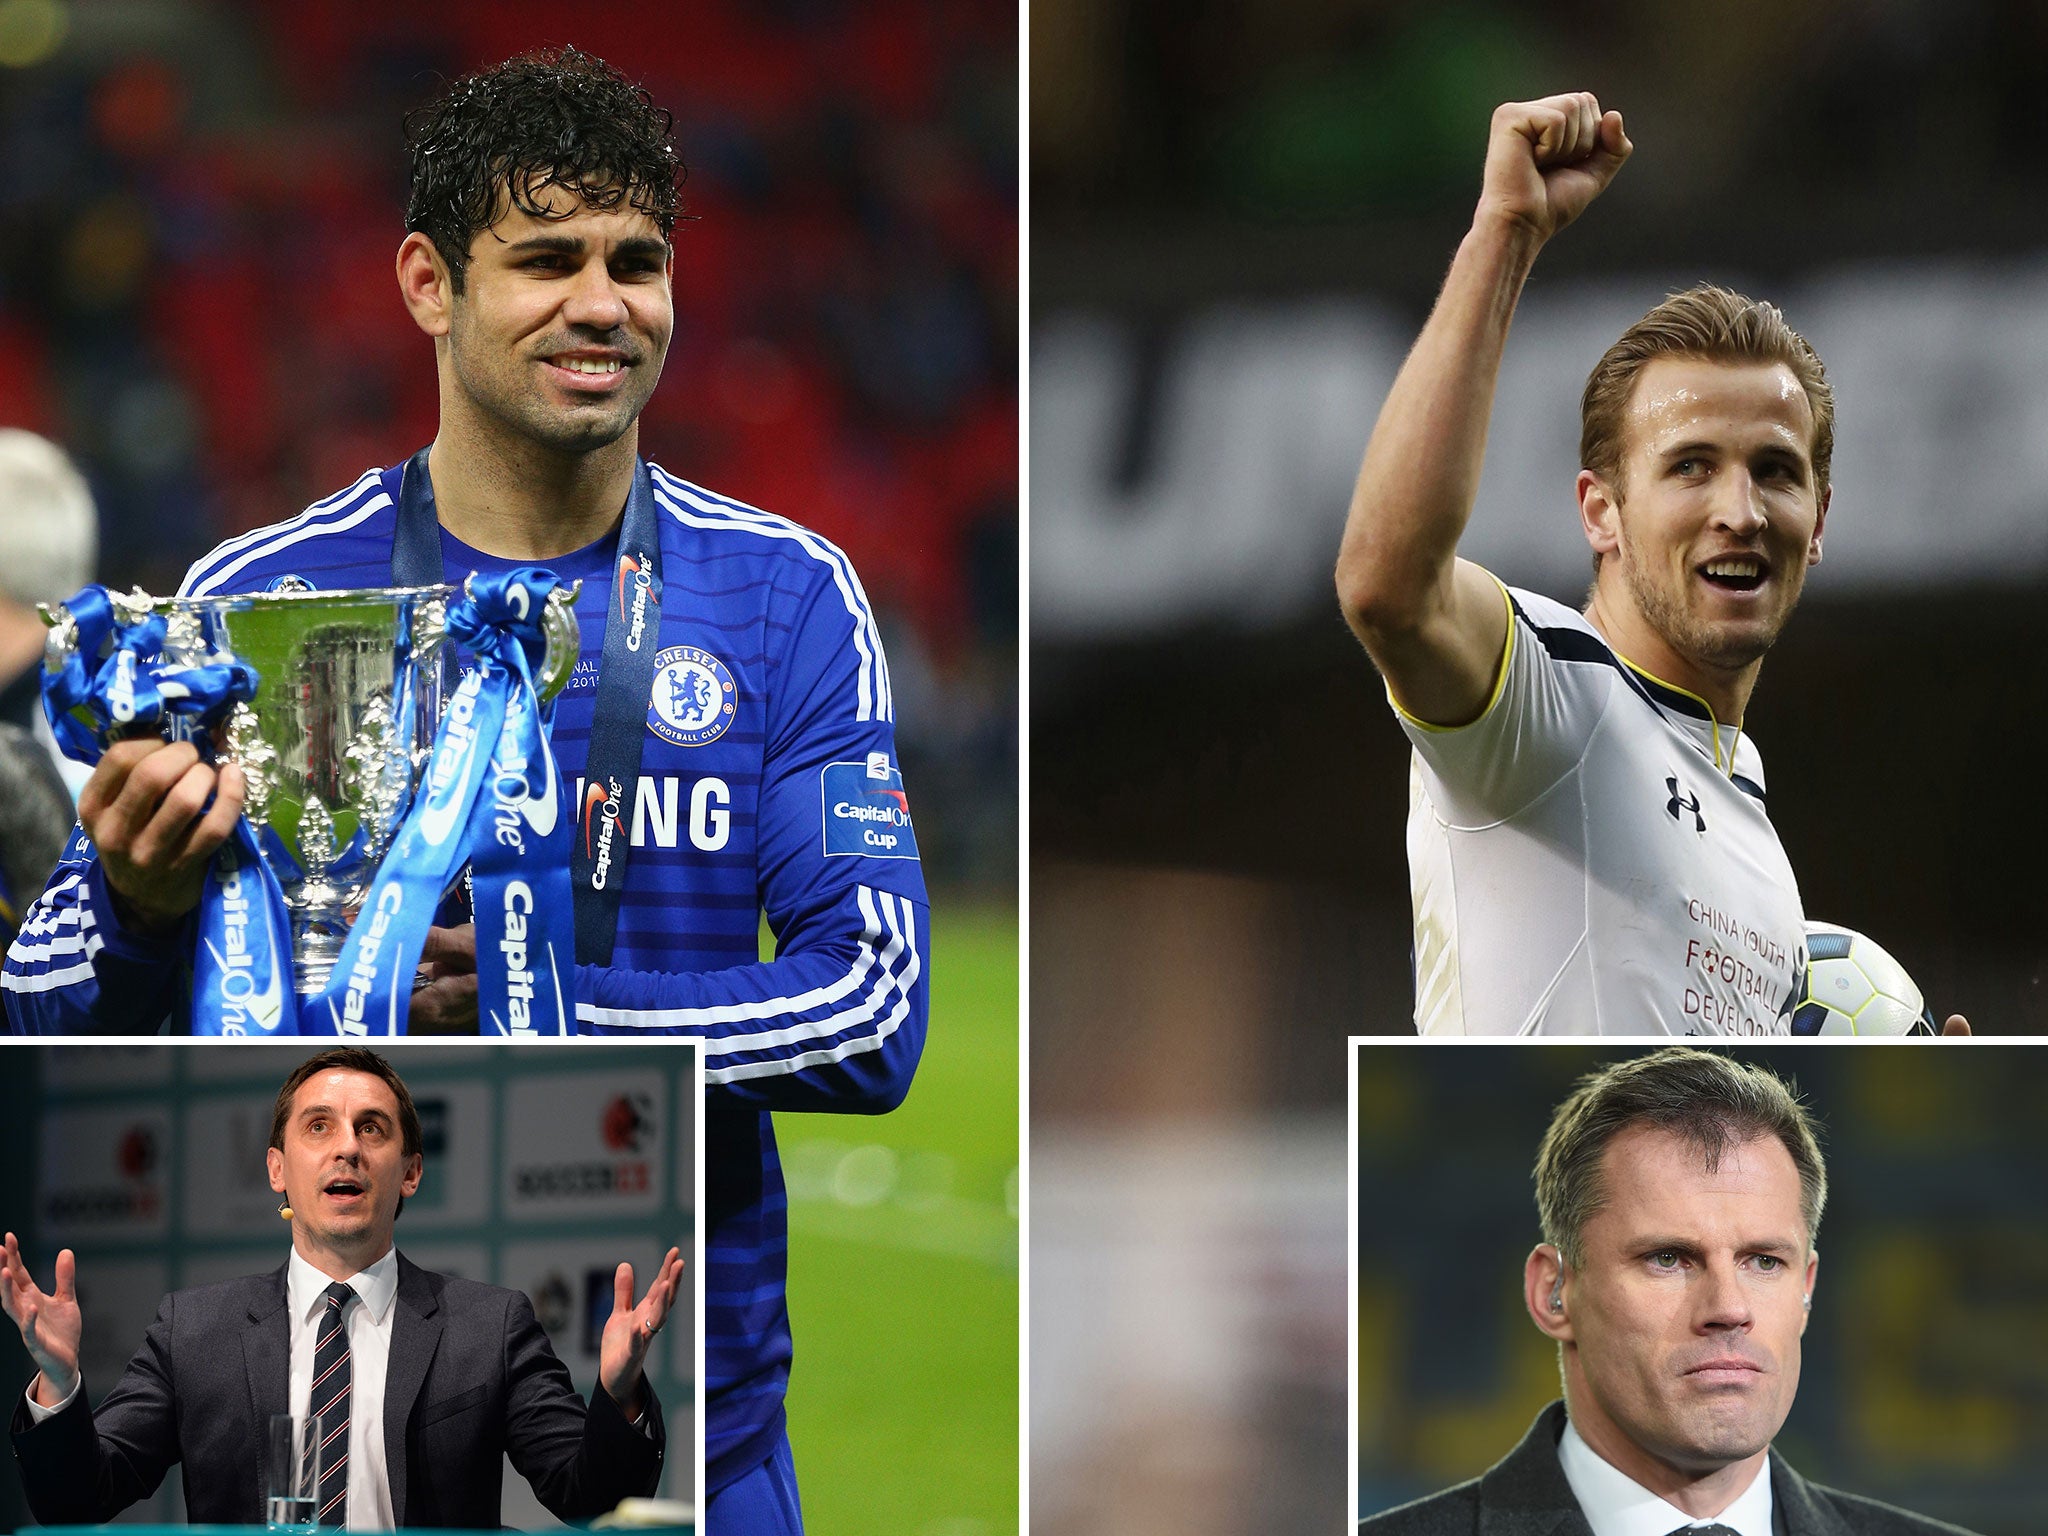 Gary Neville picked Diego Costa in his Team of the Season while Jamie Carragher picked Harry Kane